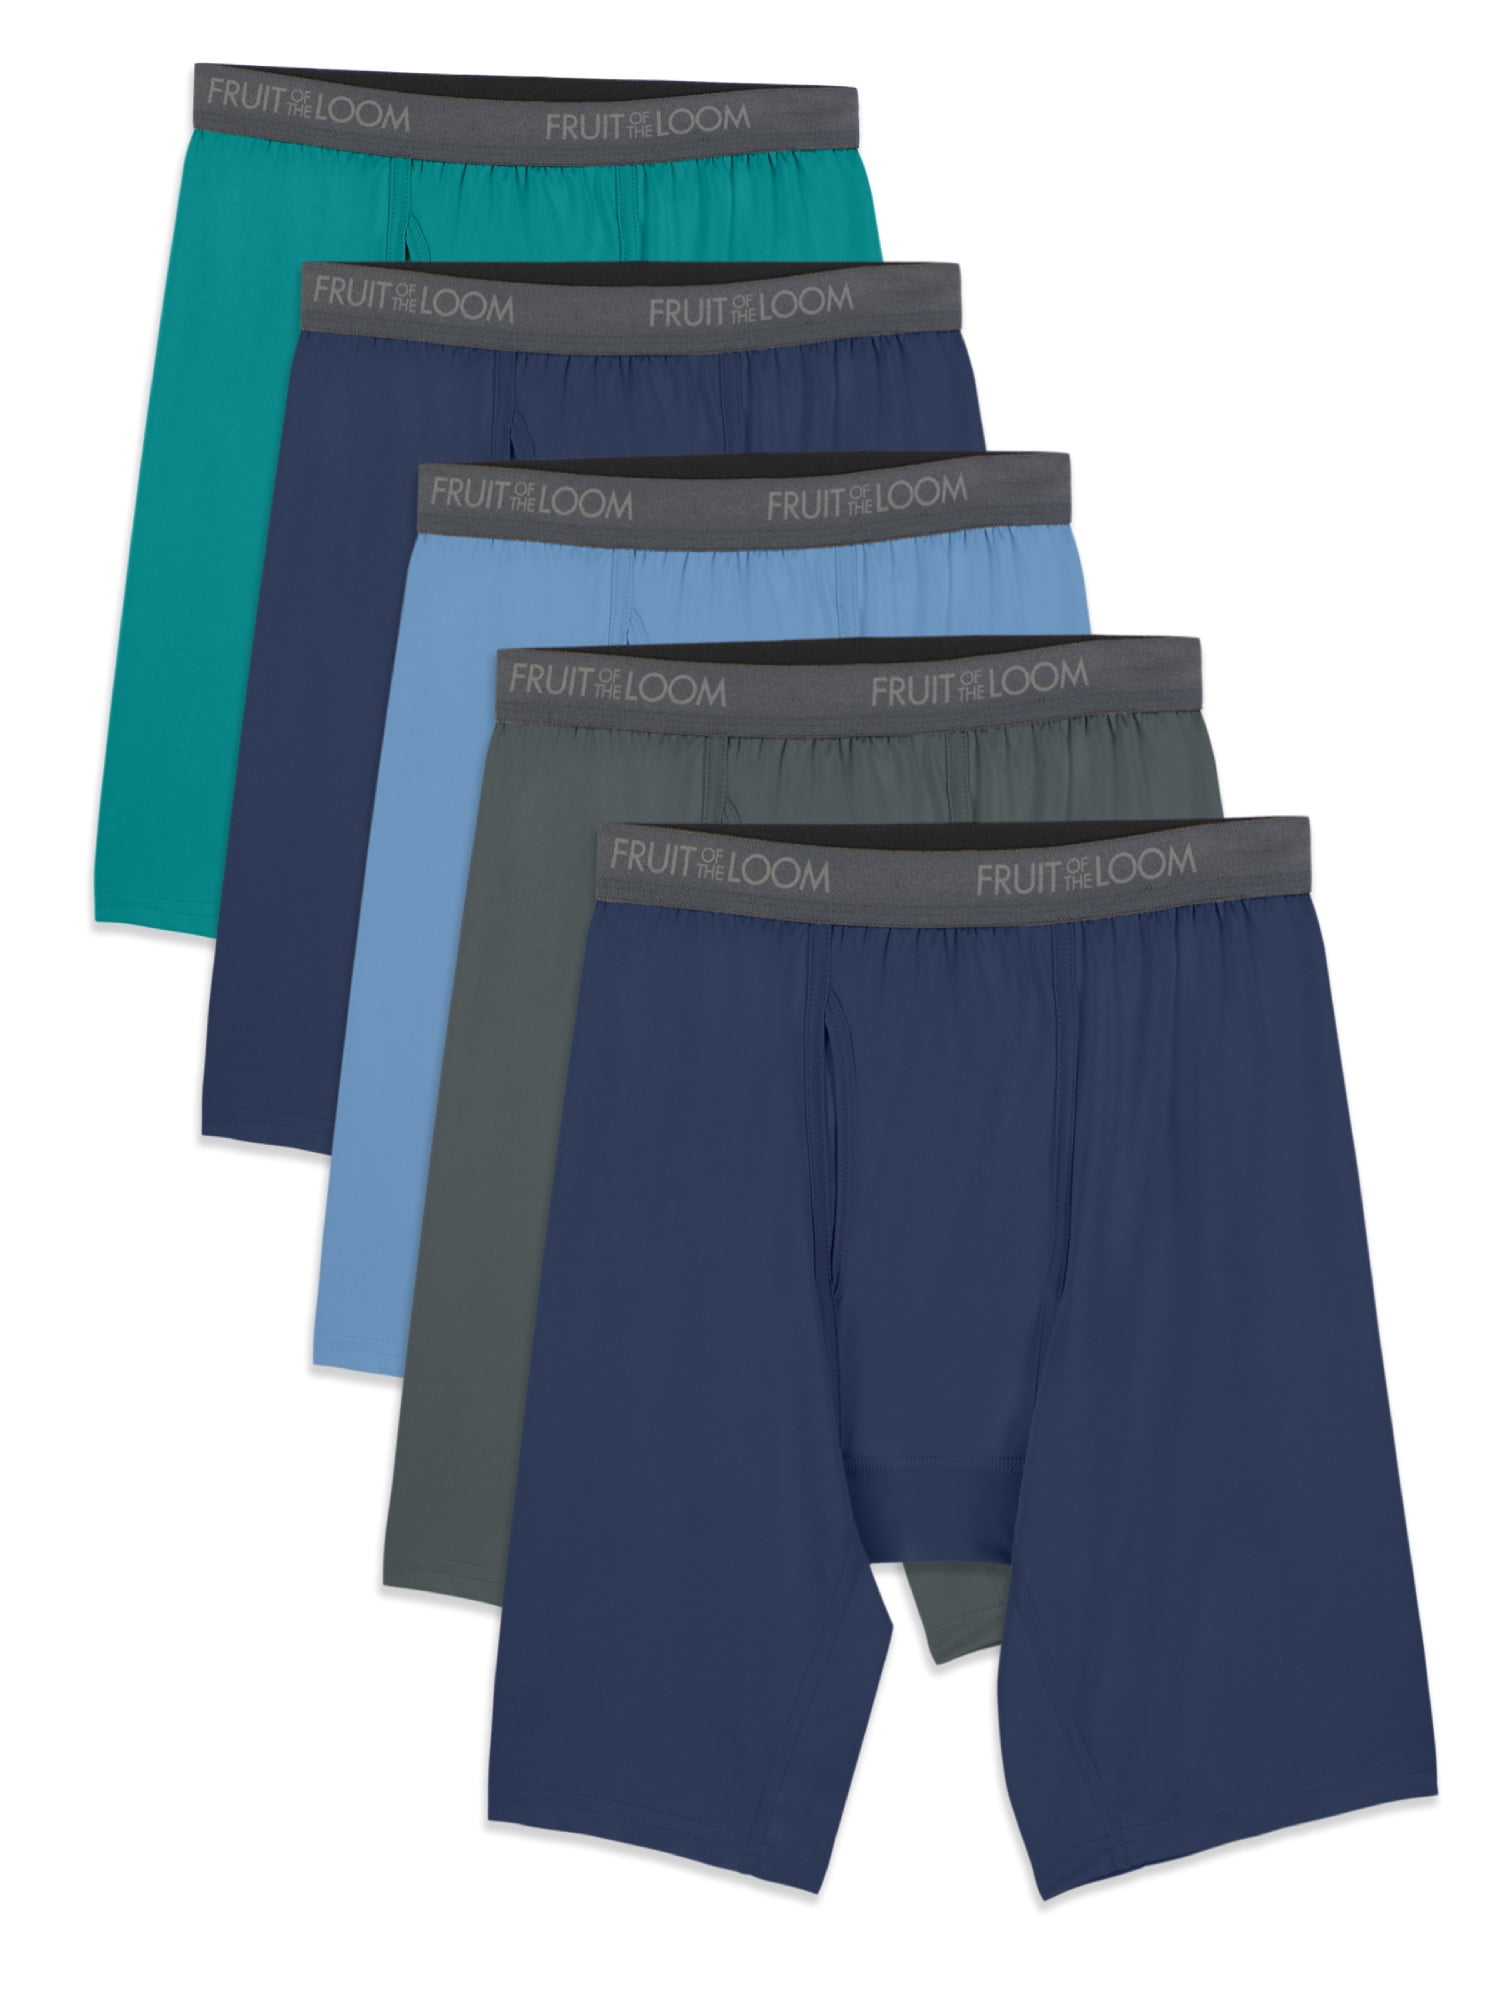 Fruit of the Loom Mens Boxer Briefs Pack of 4 